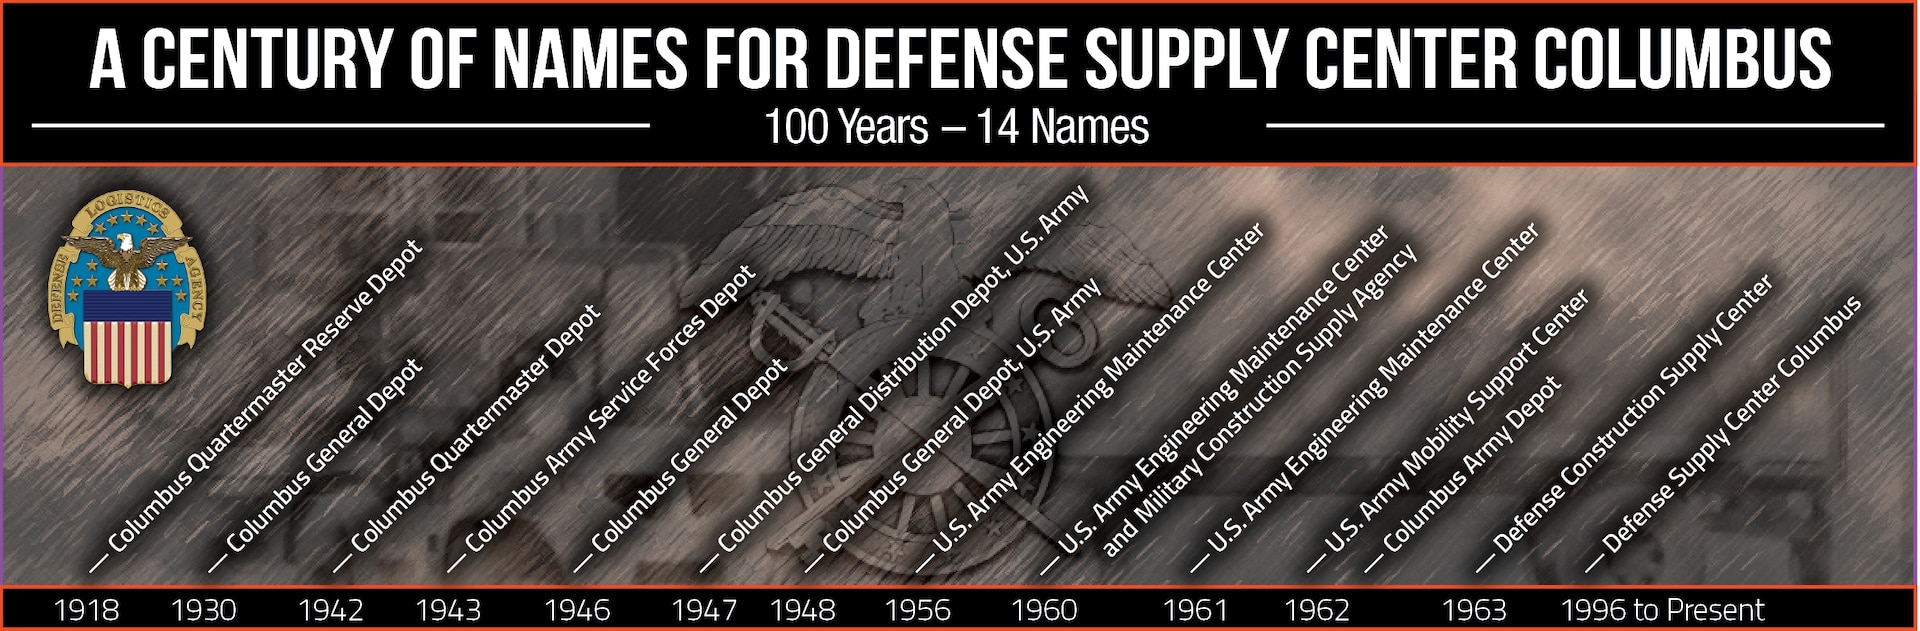 A Century of Names for Defense Supply Center Columbus. 14 names in 100 years.